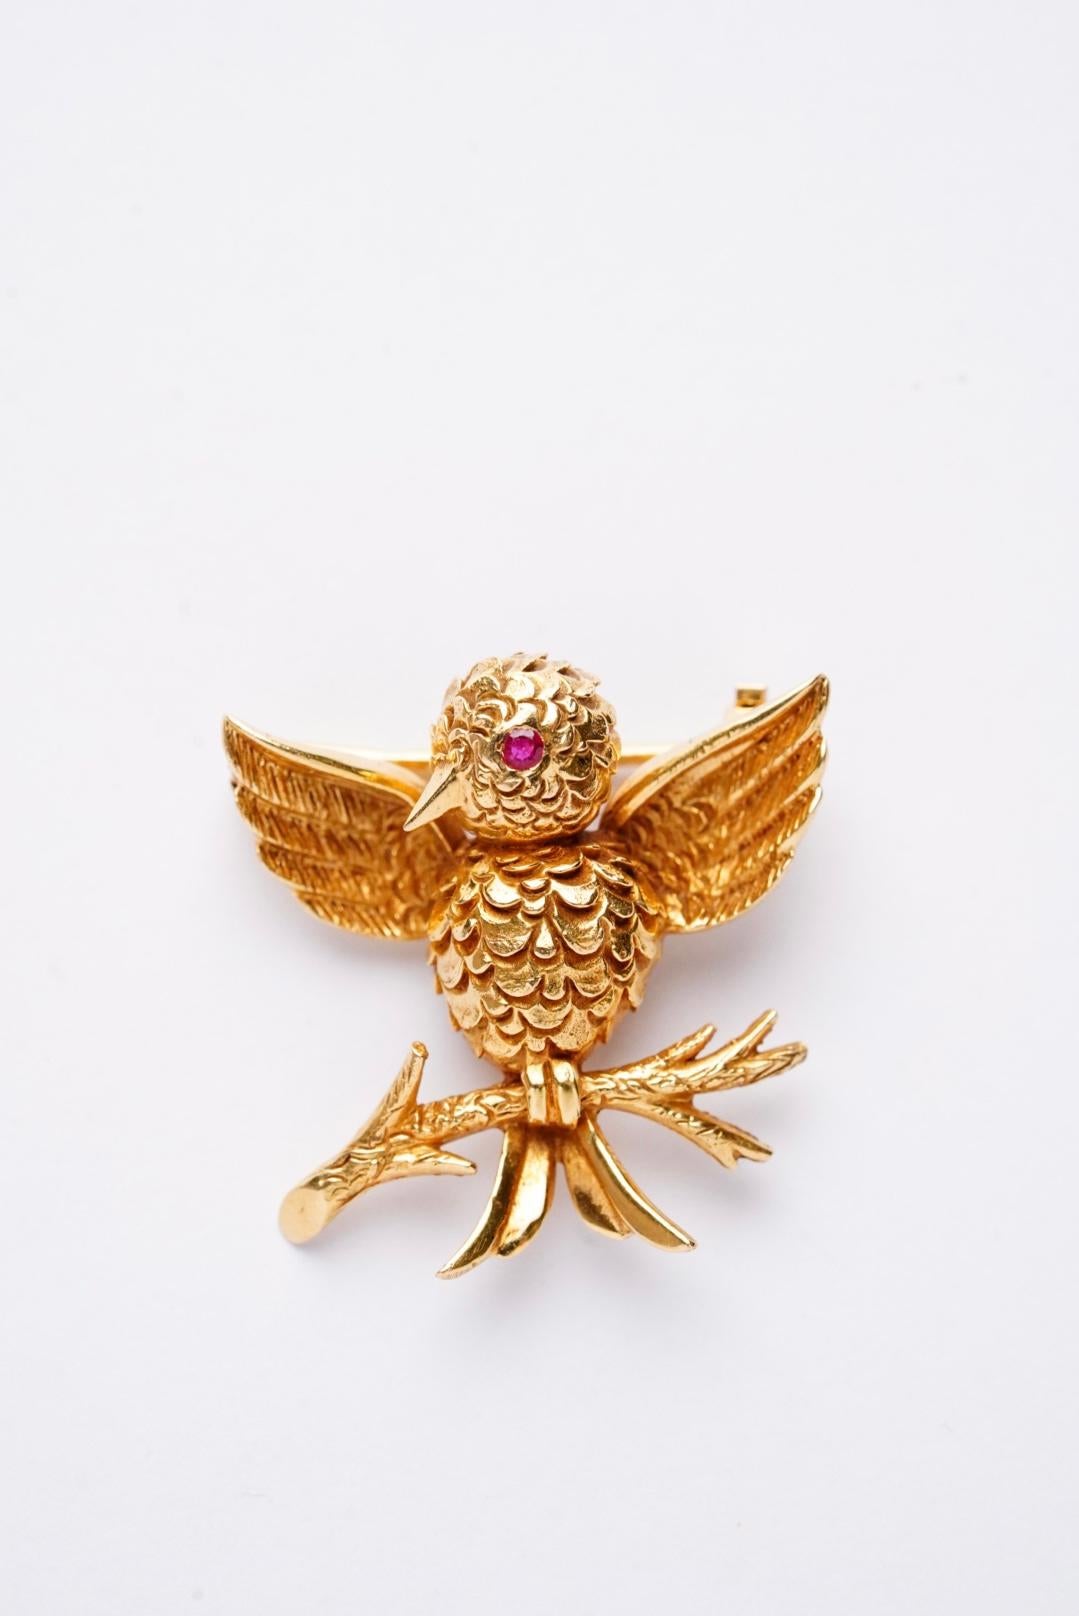 An adorable and whimsy vintage bird brooch by renowned  French jewellery house Boucheron. Their bestiary tale began in its workshops in 1866, which a collection of fabulous animals were brought to life by skilled jewellers. 
This brooch was crafted